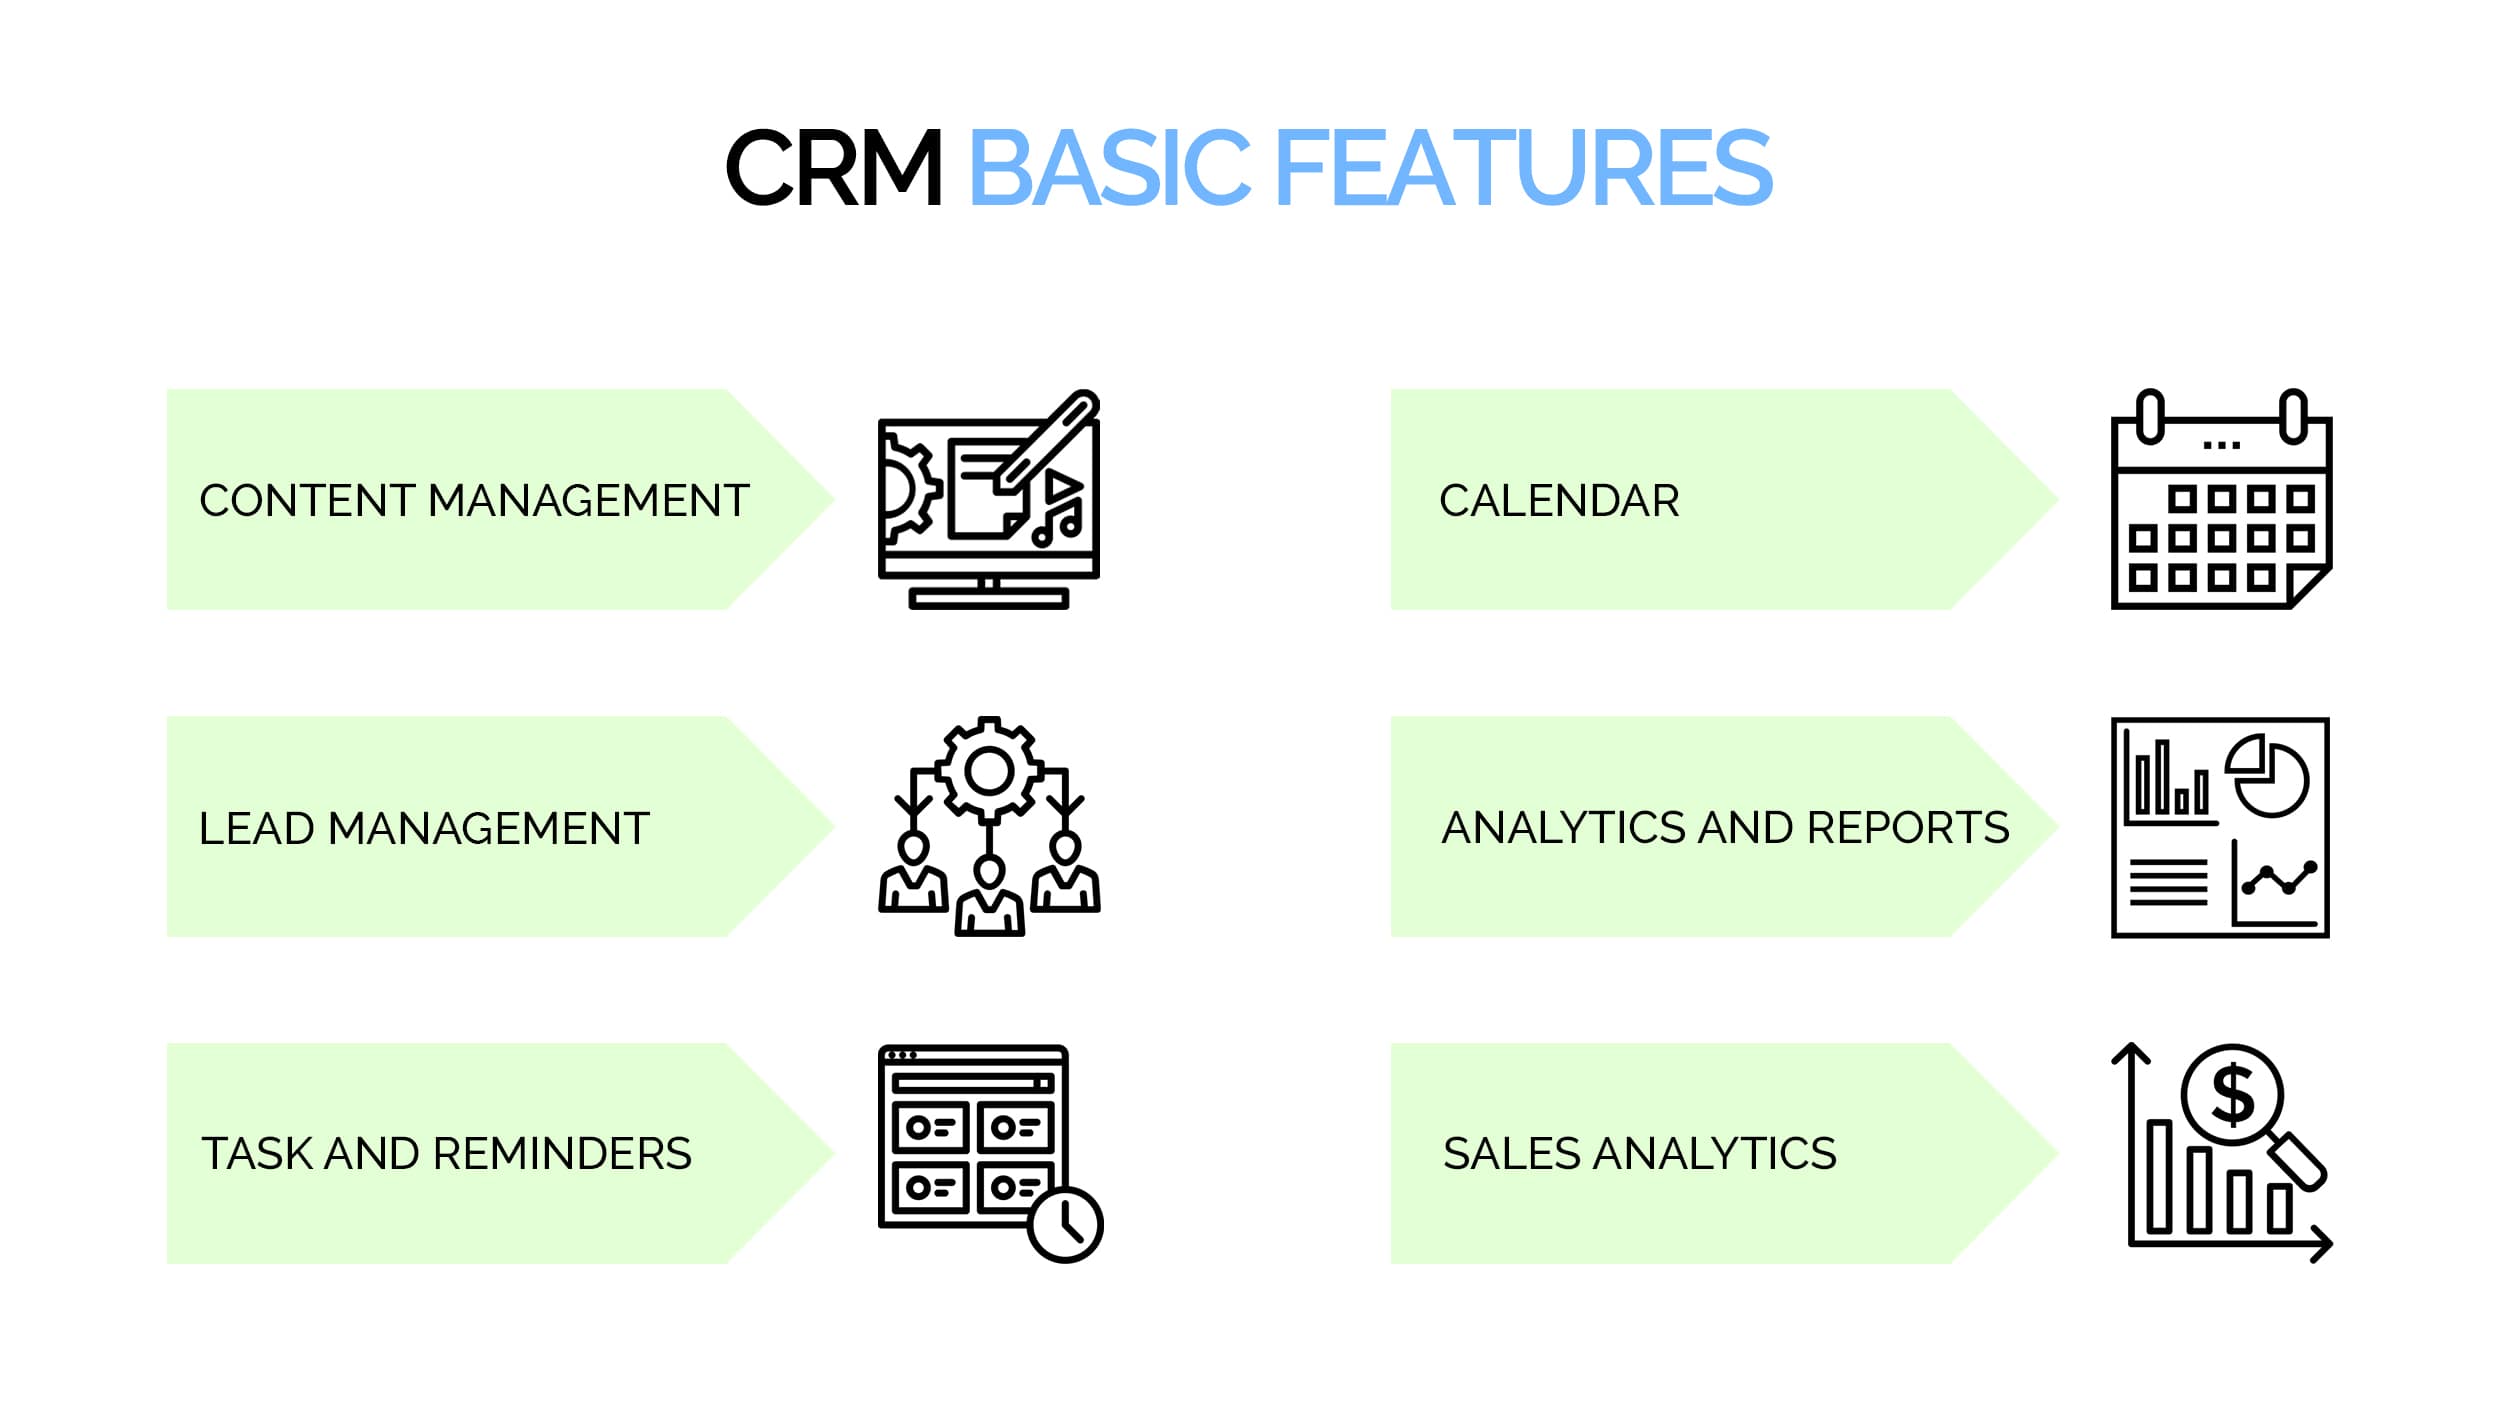 CRM basic features